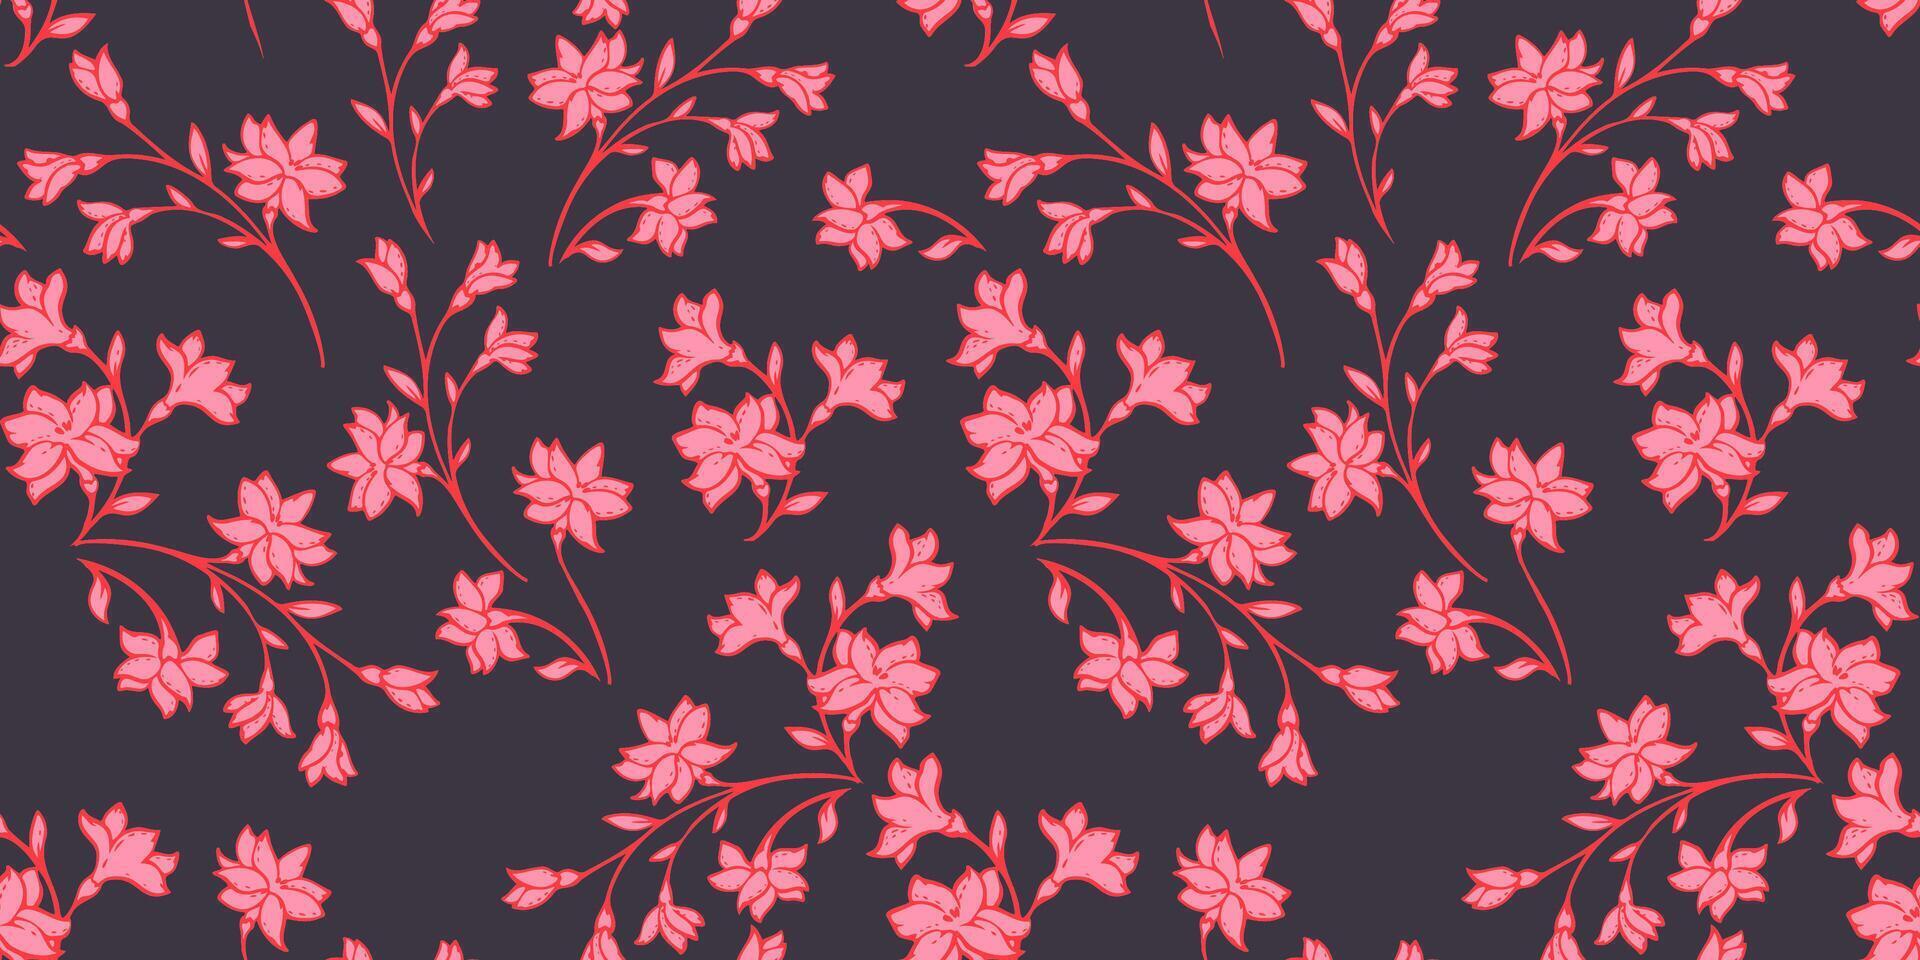 Artistic abstract branches with tiny wild ditsy floral, buds seamless pattern. hand drawn sketch red flowers silhouettes on dark background printing. Collage template for designs, fabric vector